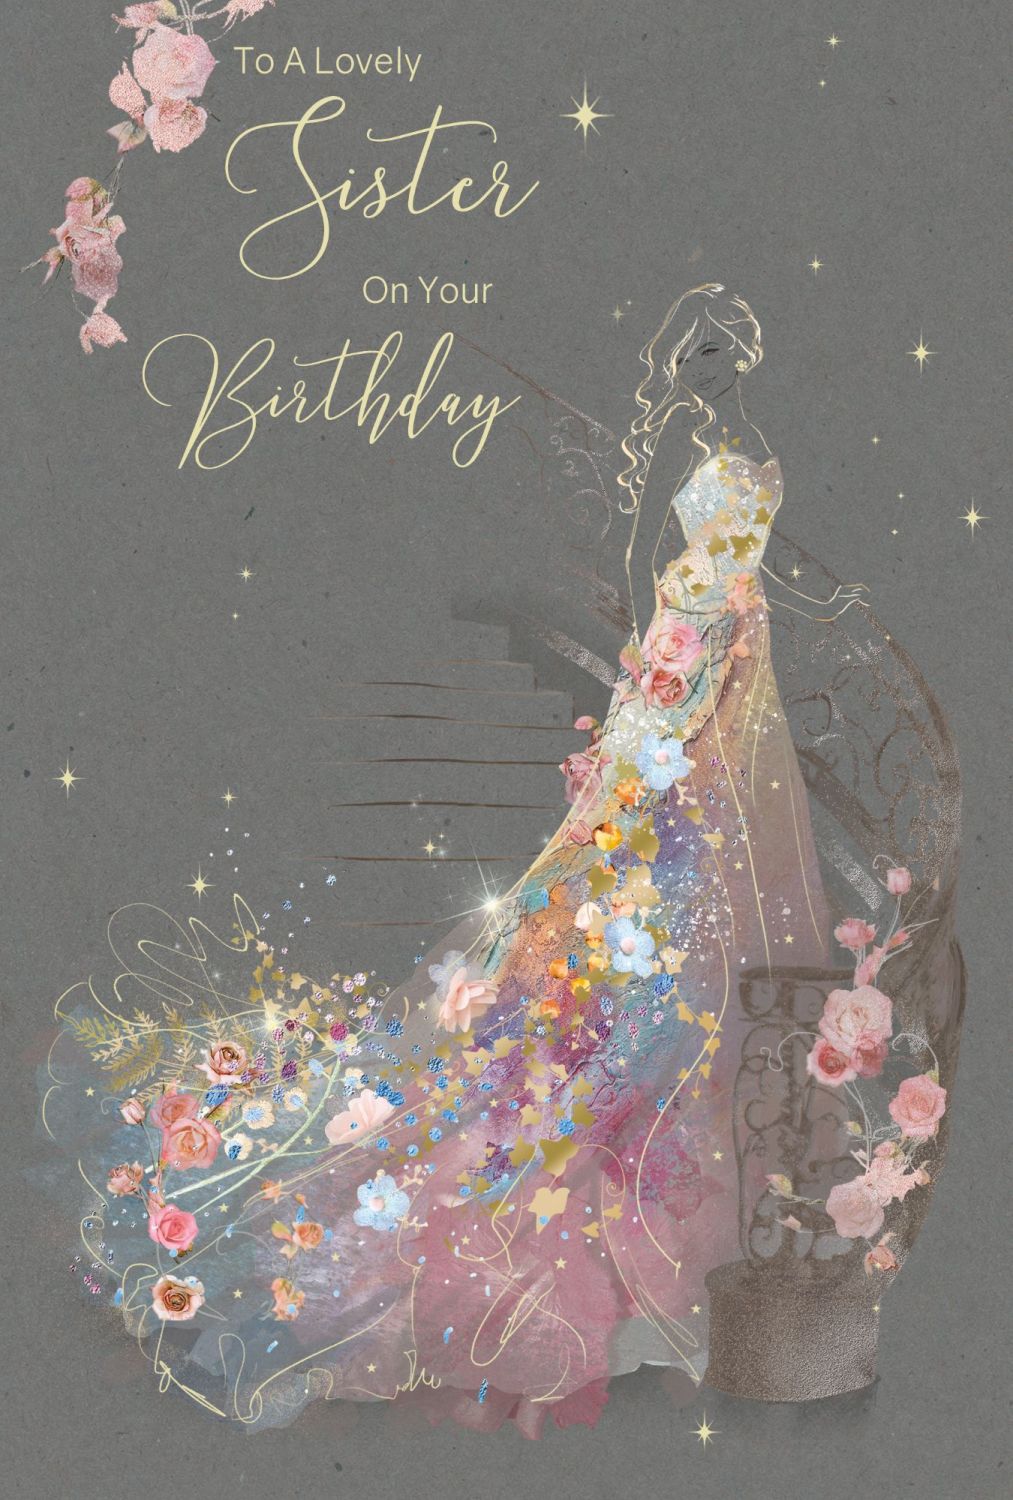 Lovely Sister Birthday Card - ON Your BIRTHDAY - SPARKLY Birthday Card For 